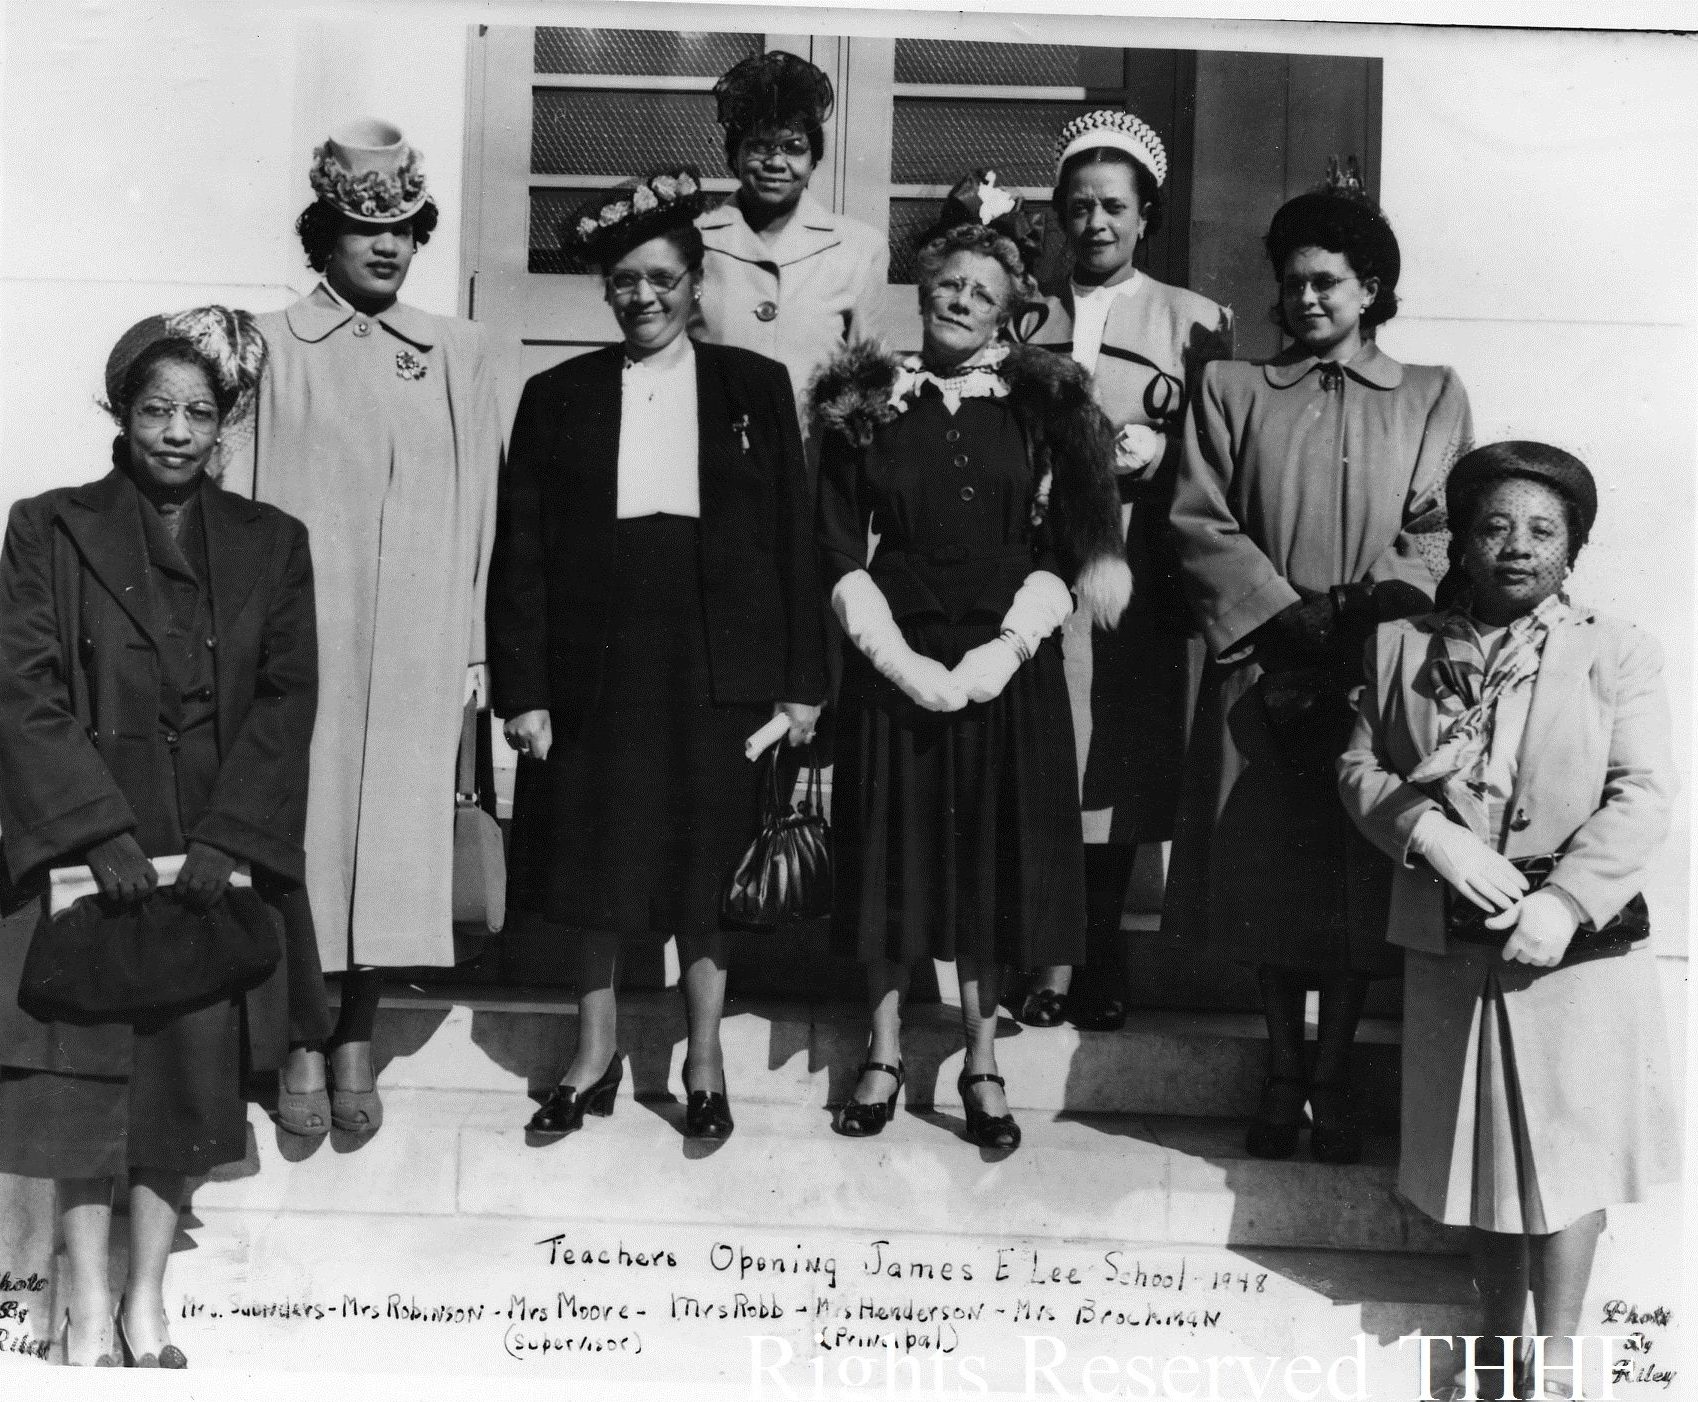 Teachers opening James E. Lee School in Falls Church, 1948. The new $160,000 elementary school for Black students, which replaced an old frame schoolhouse, required years of prodding by community activists, led by Mary Ellen Henderson, a noted Black educator and wife of civil rights leader E.B. Henderson. Source: Source: Tinner Hill Heritage Foundation.